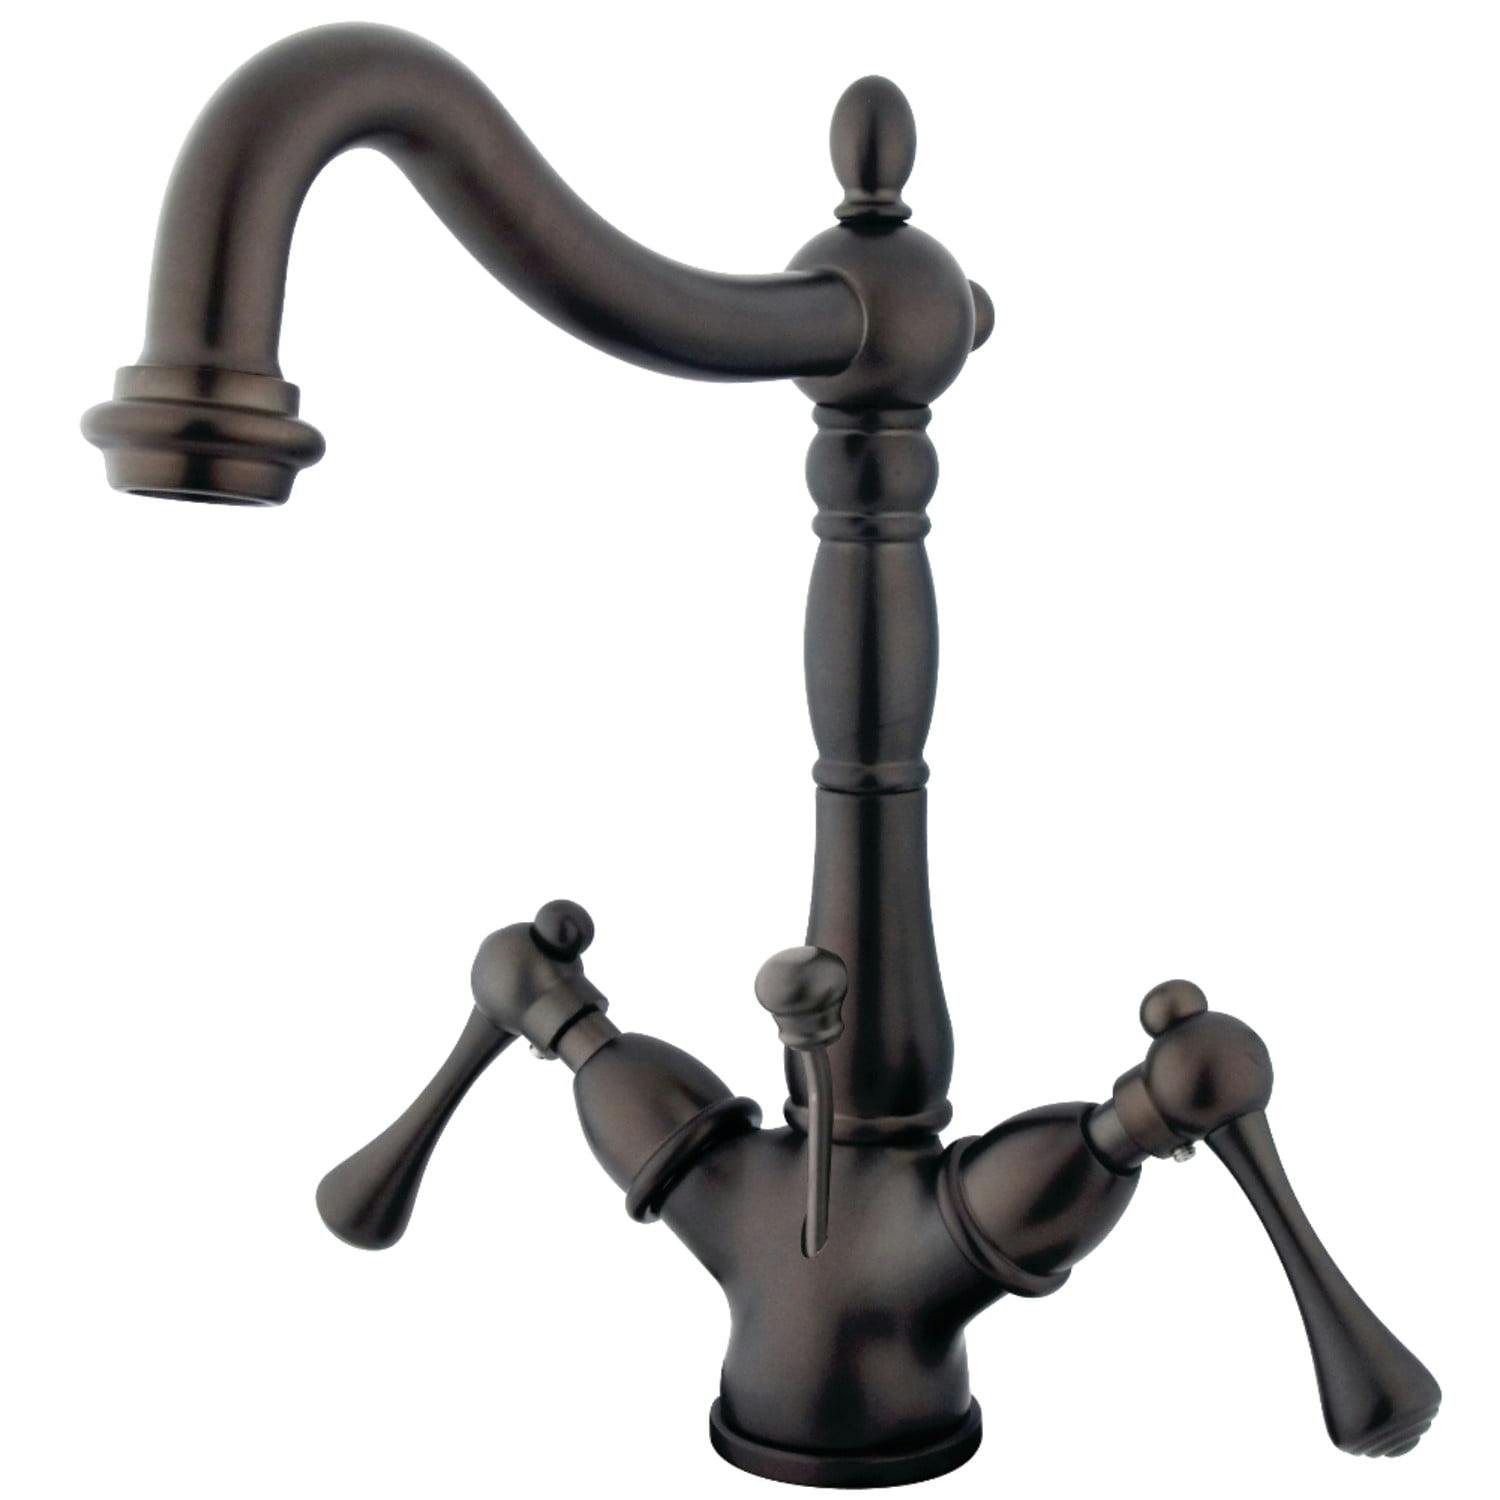 Heritage Elegance Oil Rubbed Bronze Two-Handle Bathroom Faucet